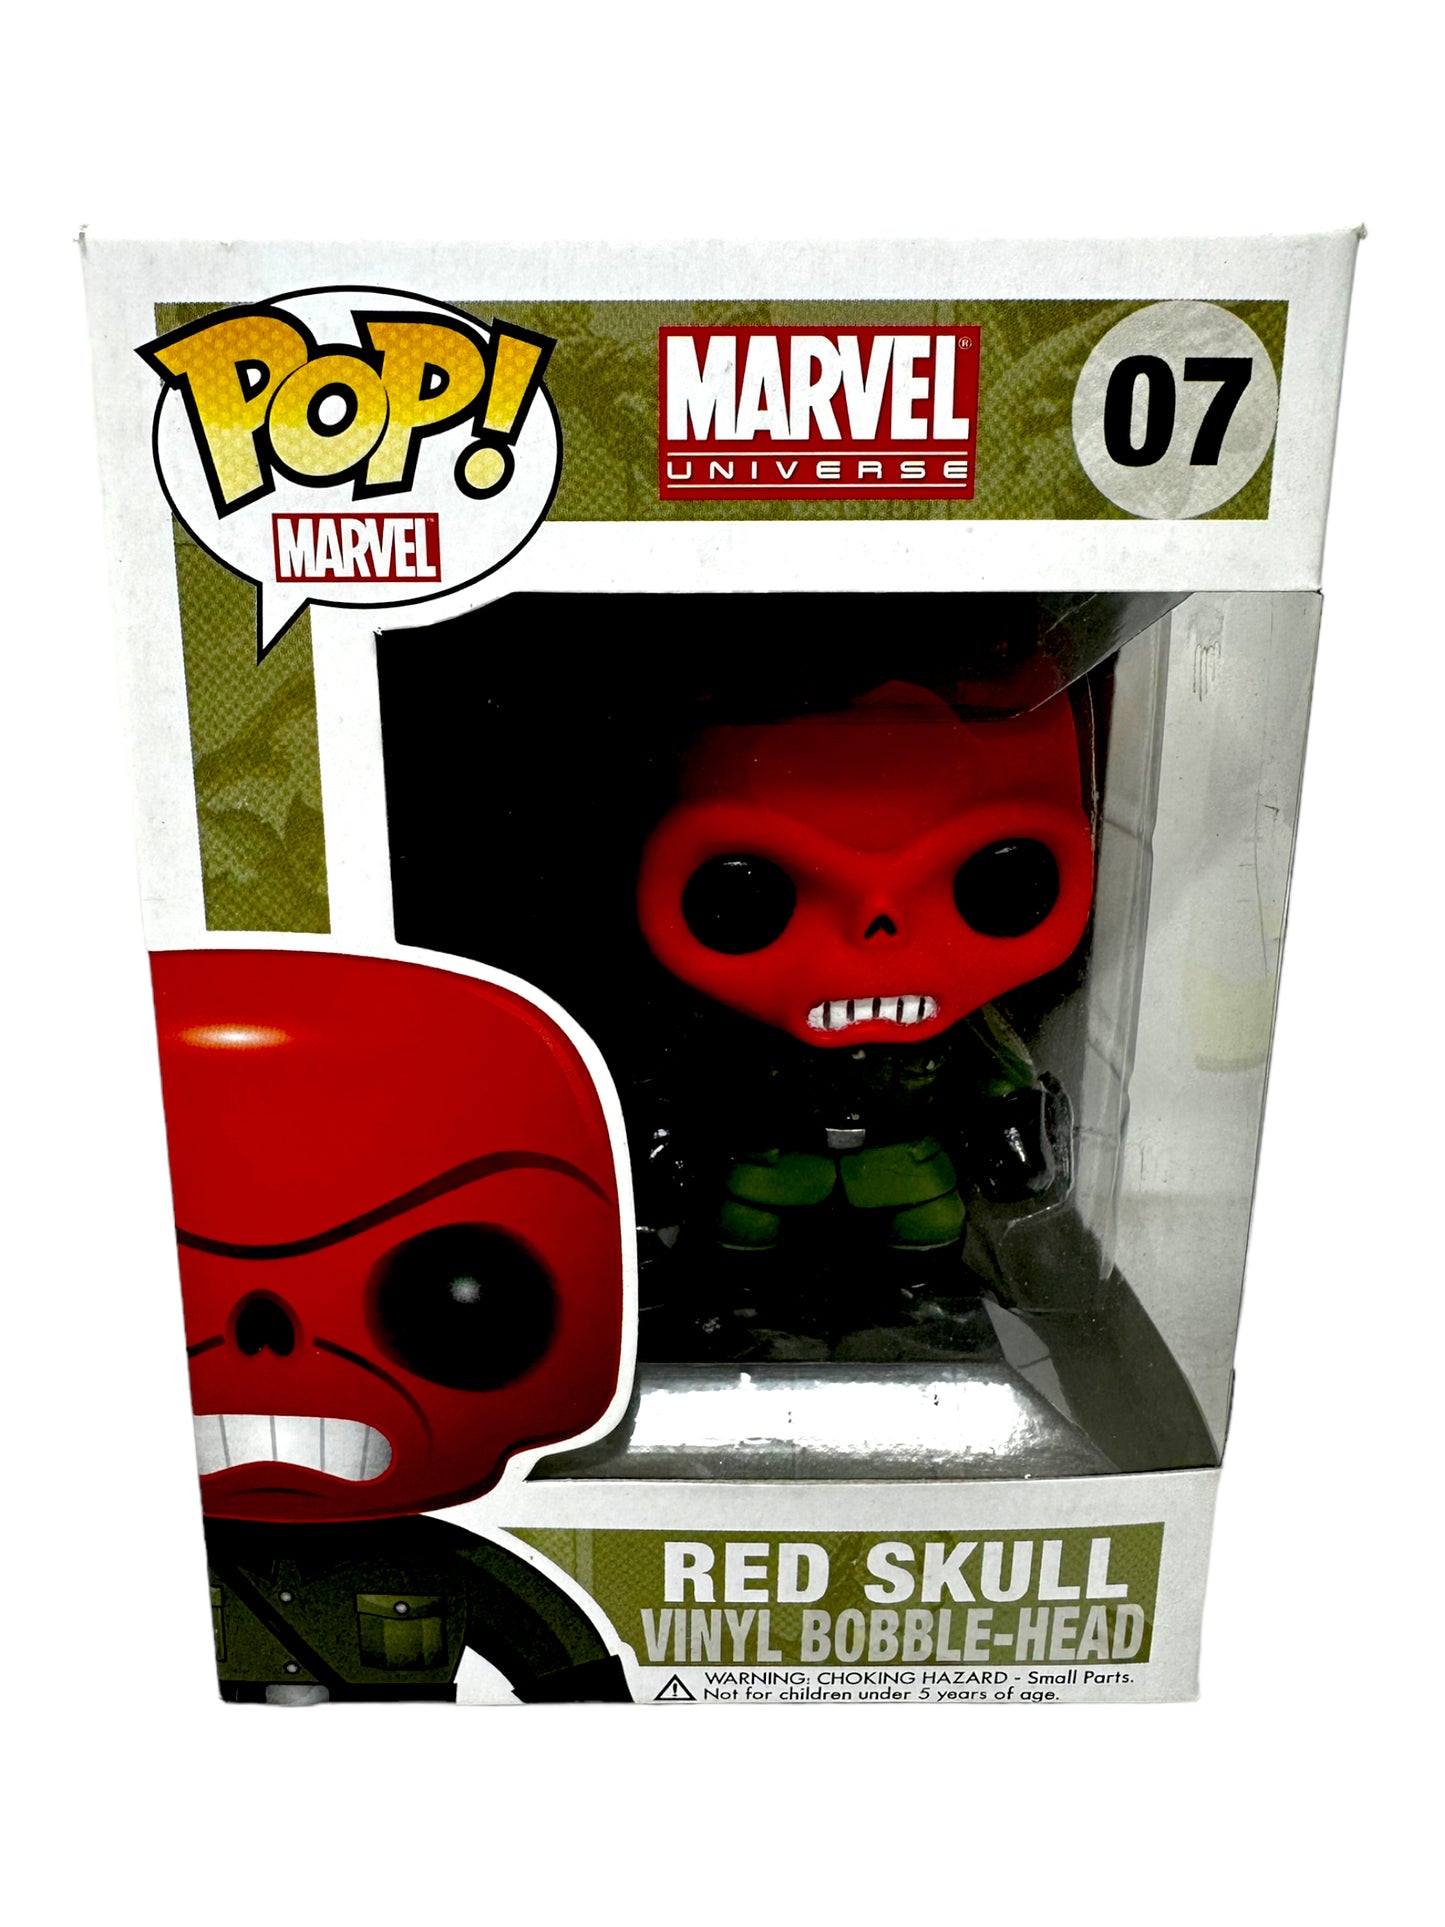 Sold First Run! 2011 Red Skull 07